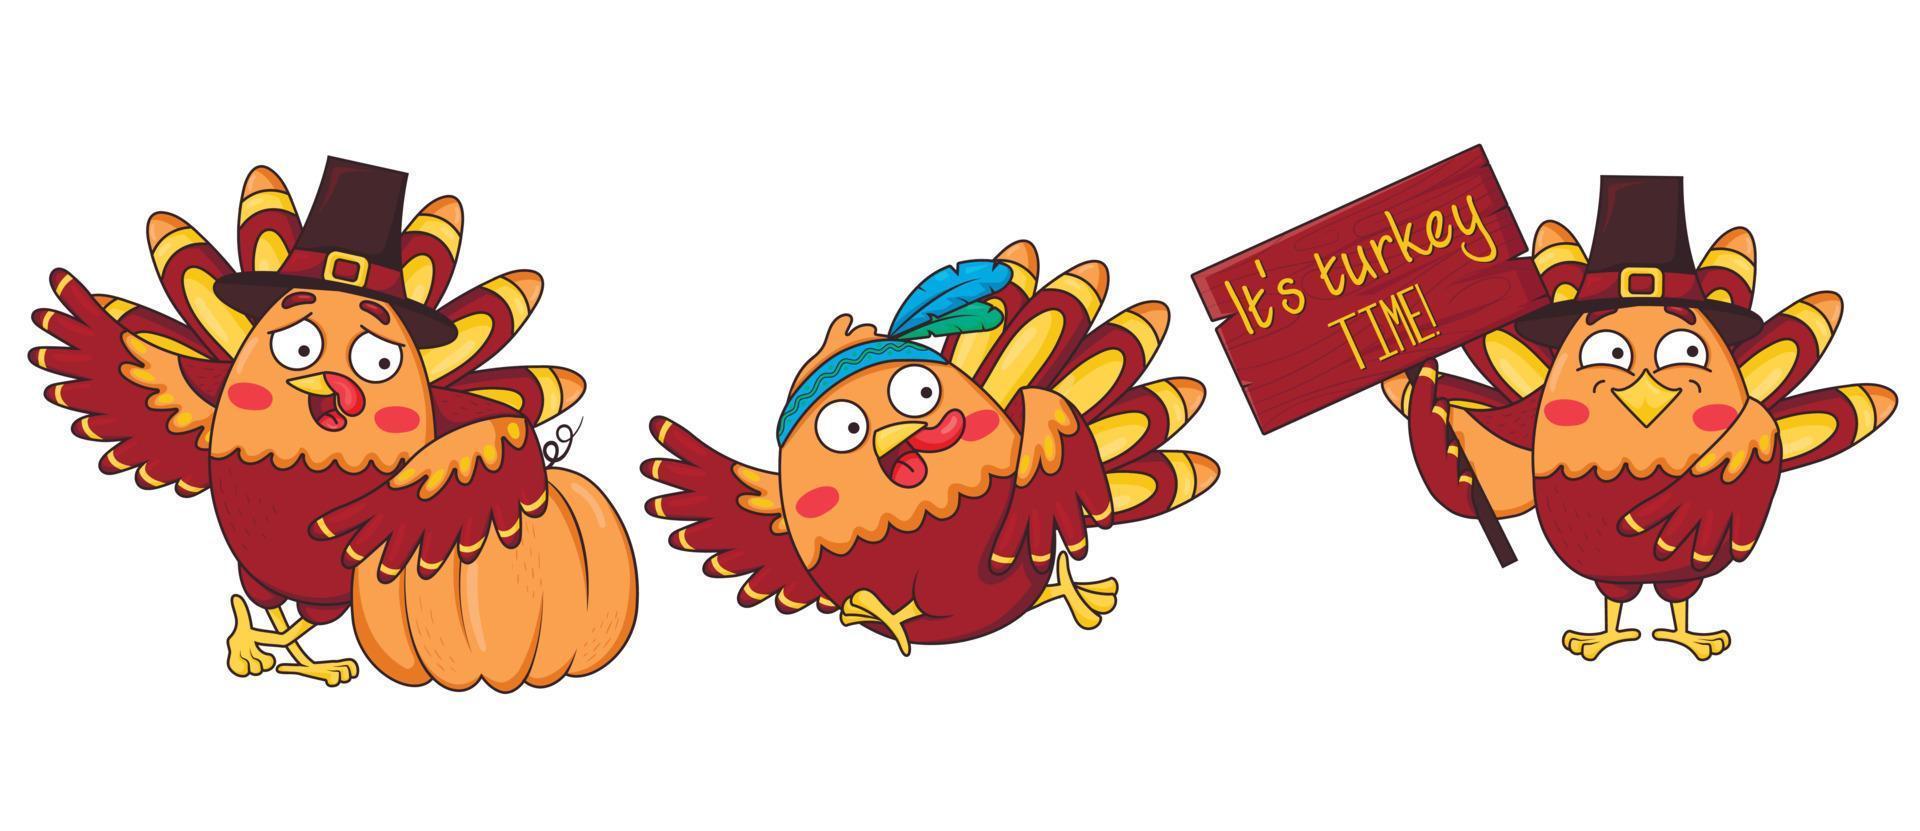 Bundle of cartoon funny turkeys in different poses wearing a pilgrim's hat and an Indian headband with feathers vector